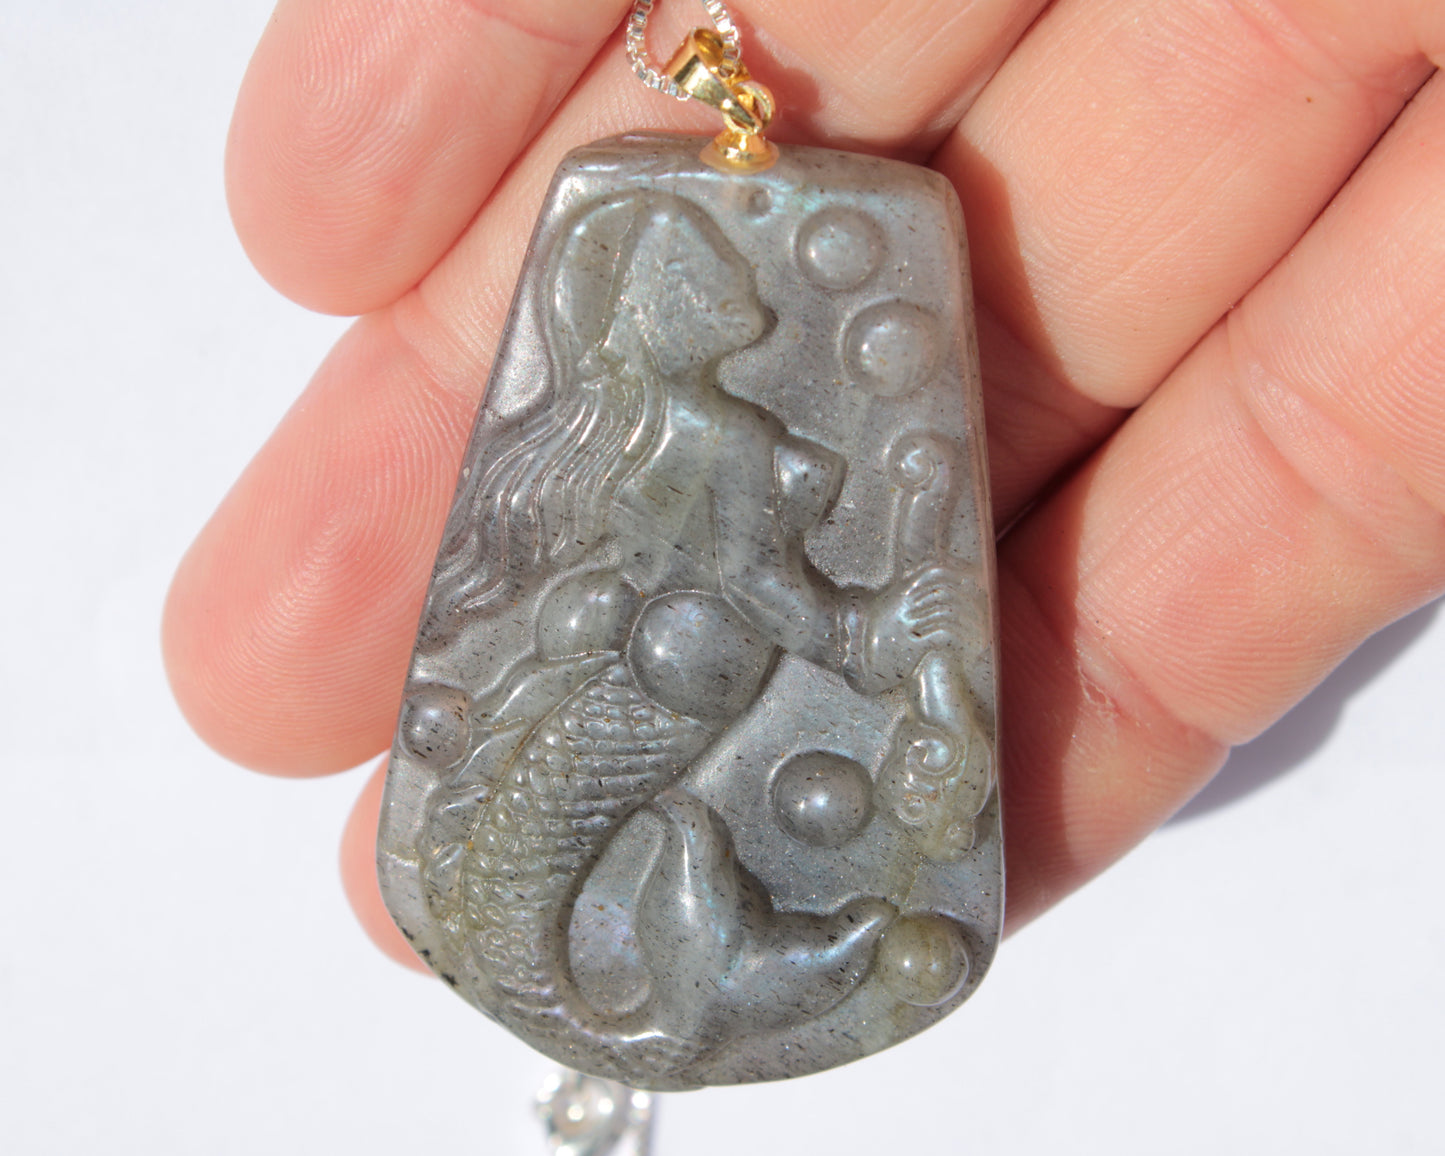 Labradorite mermaid carved pendant with necklace